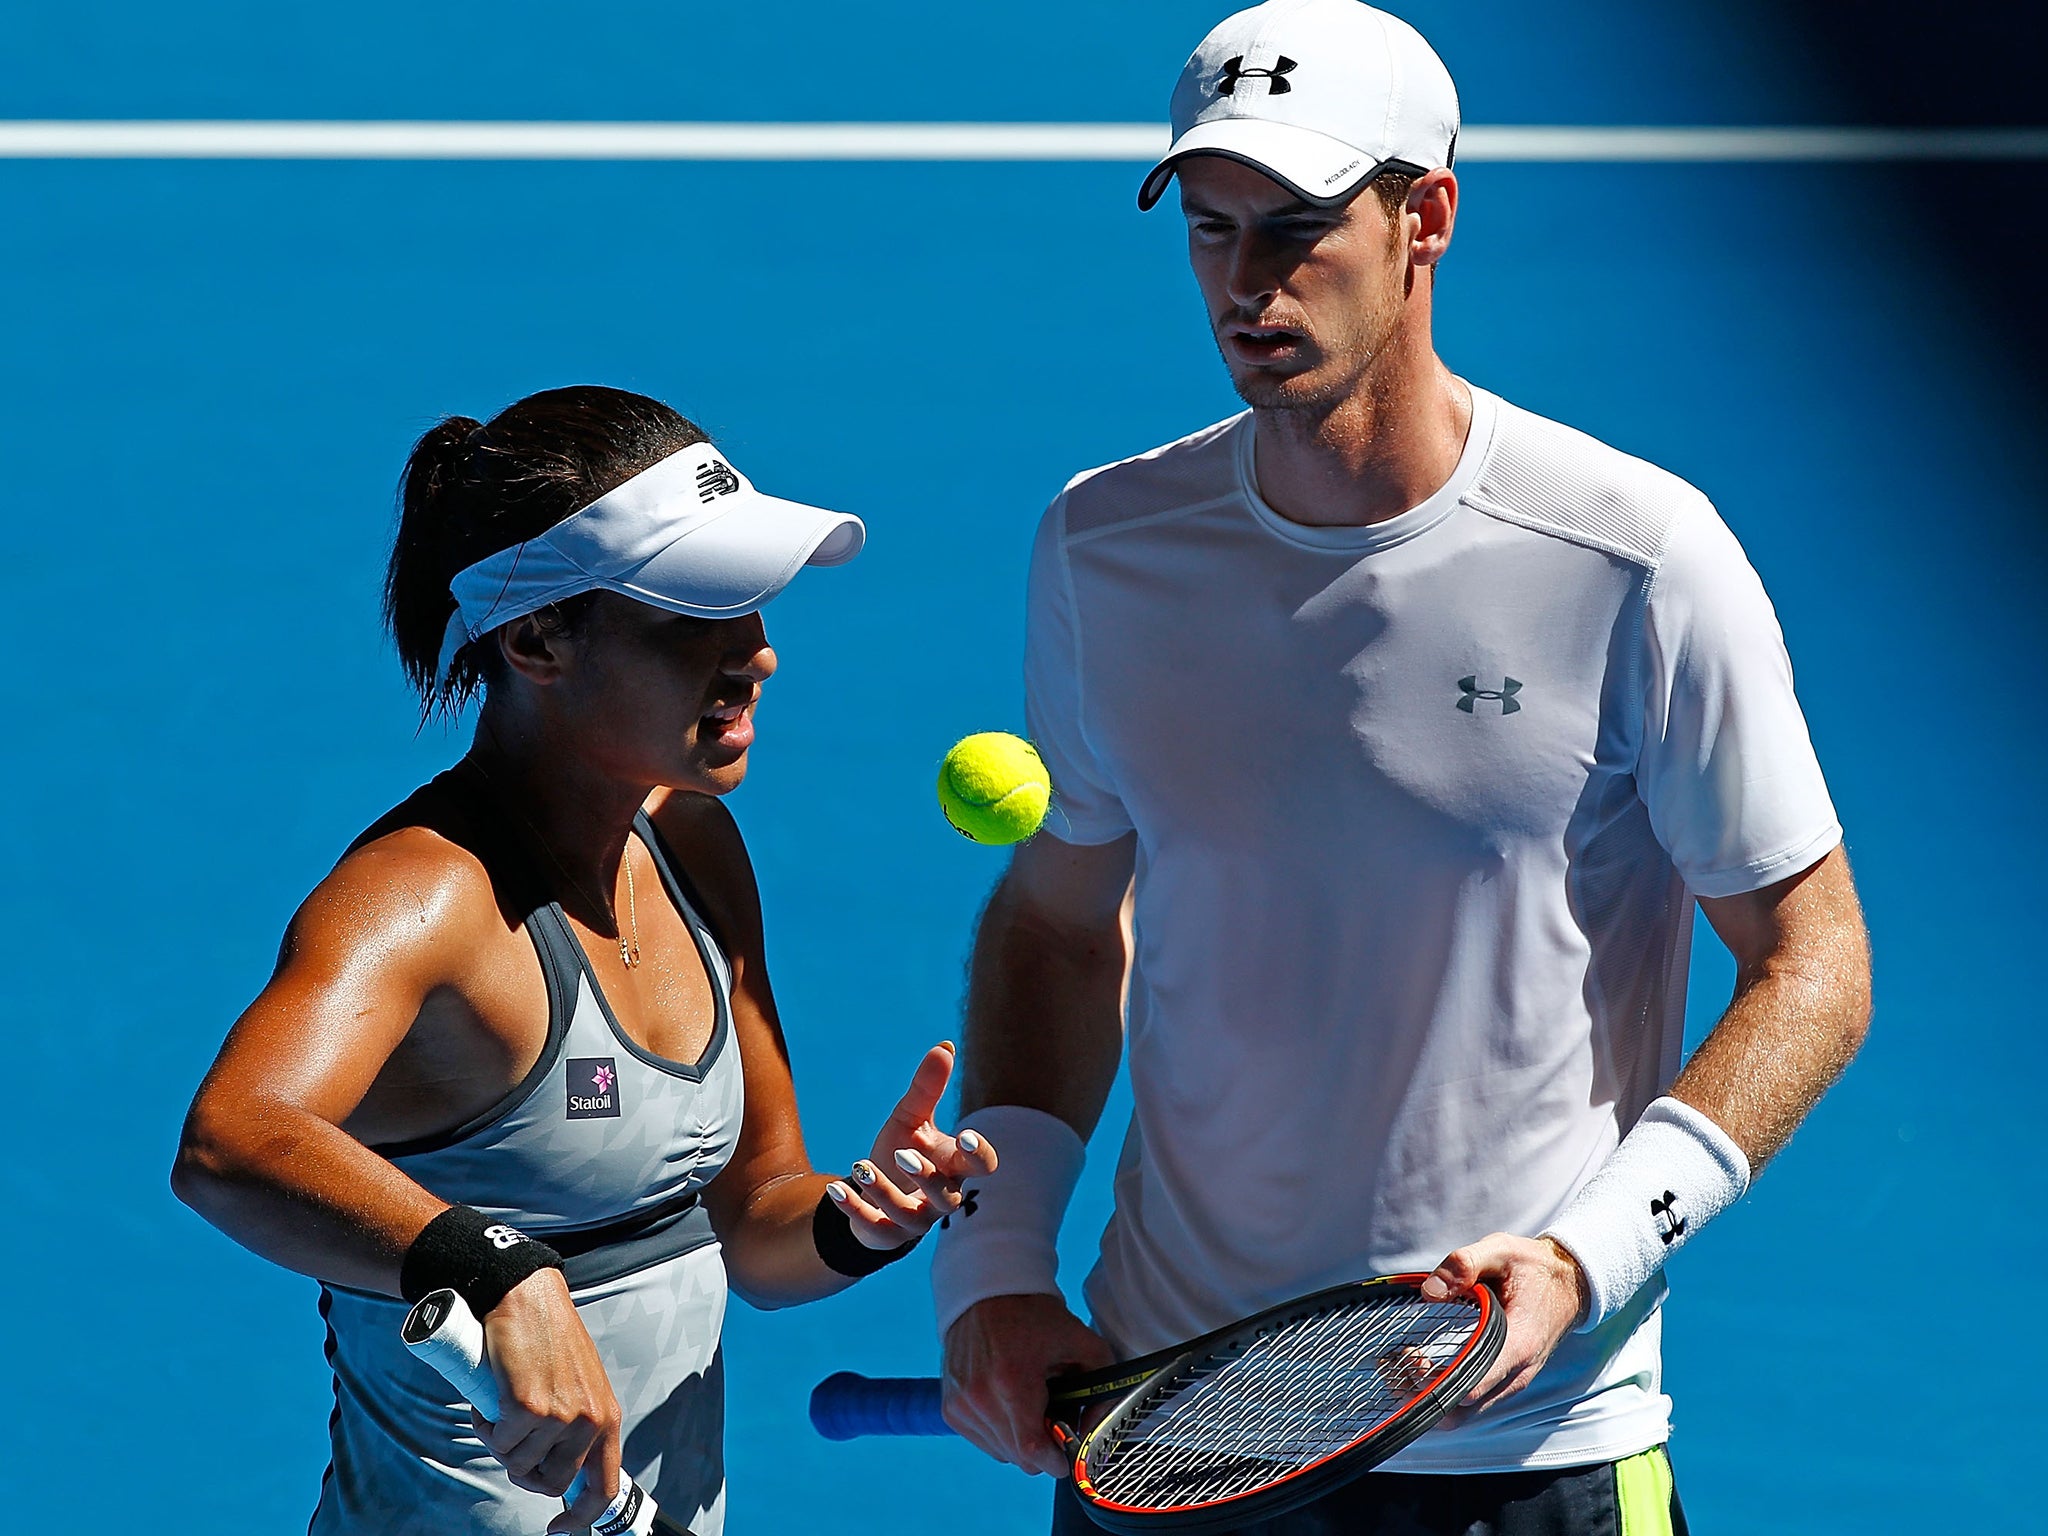 Heather Watson and Andy Murray of Great Britain talk in-between serves in the mixed doubles match against Jerzy Janowicz and Agnieszka Radwansk